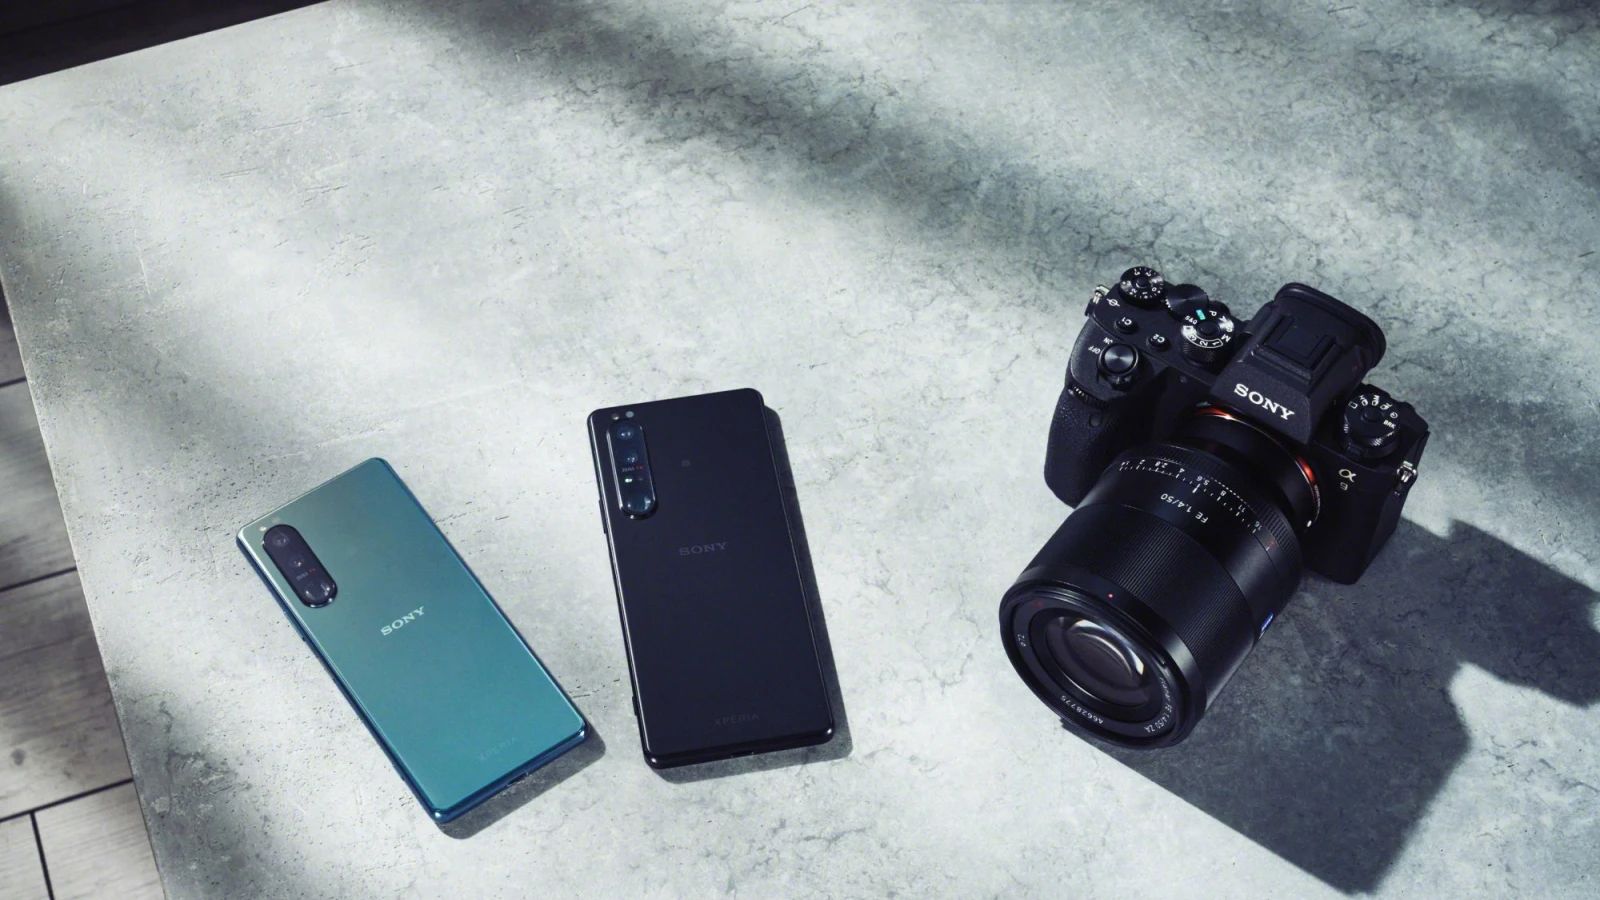 Sony finally releases Android 12 update for Xperia 1 III and Xperia 5 III flagships